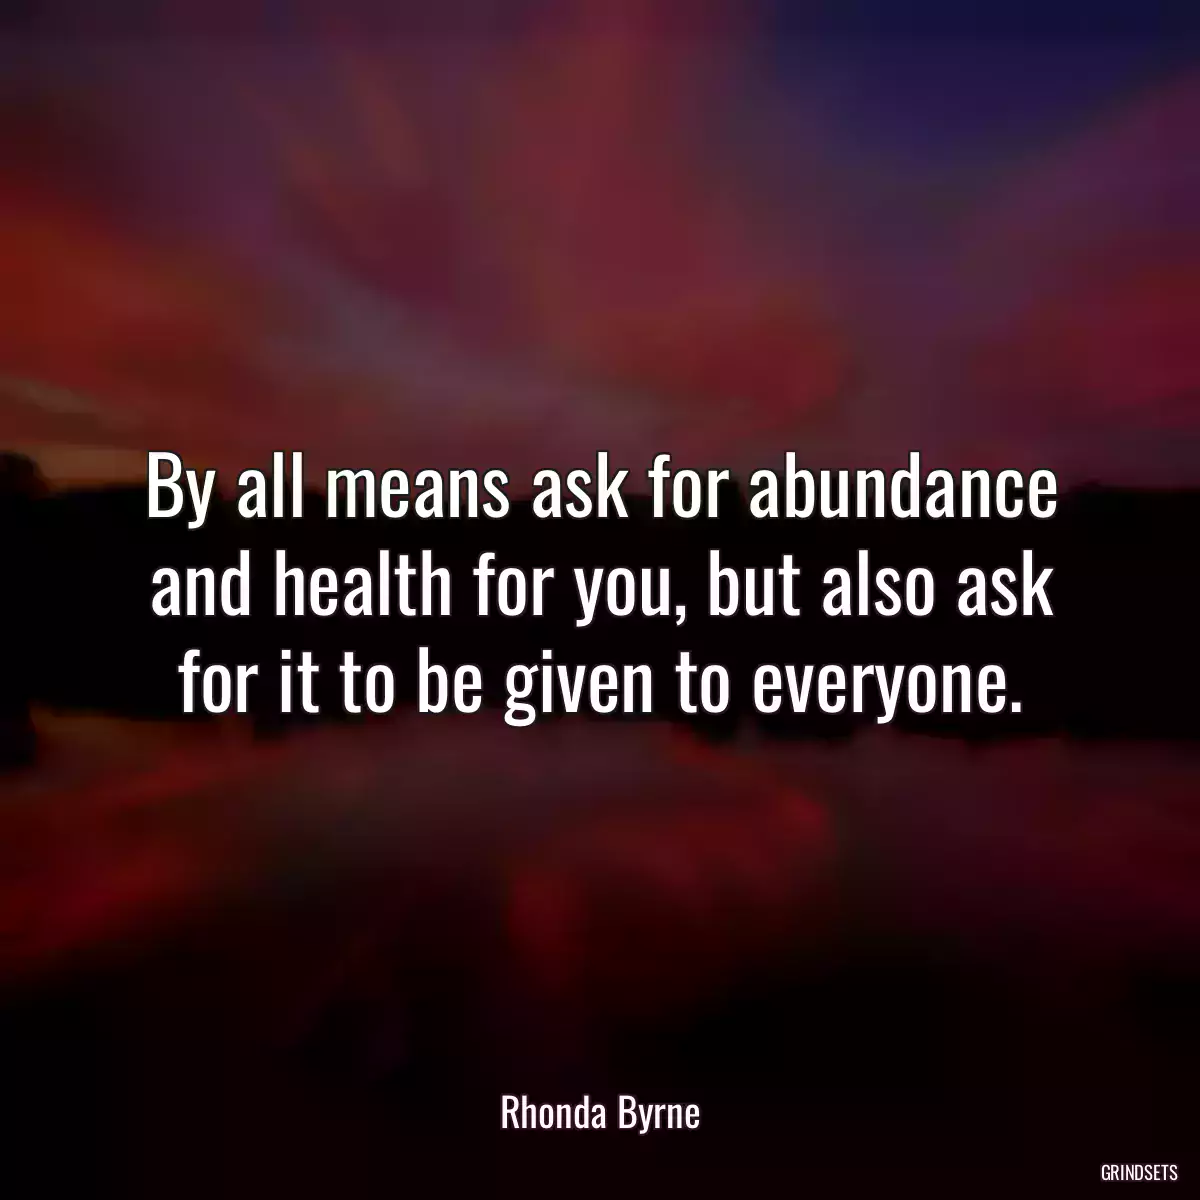 By all means ask for abundance and health for you, but also ask for it to be given to everyone.